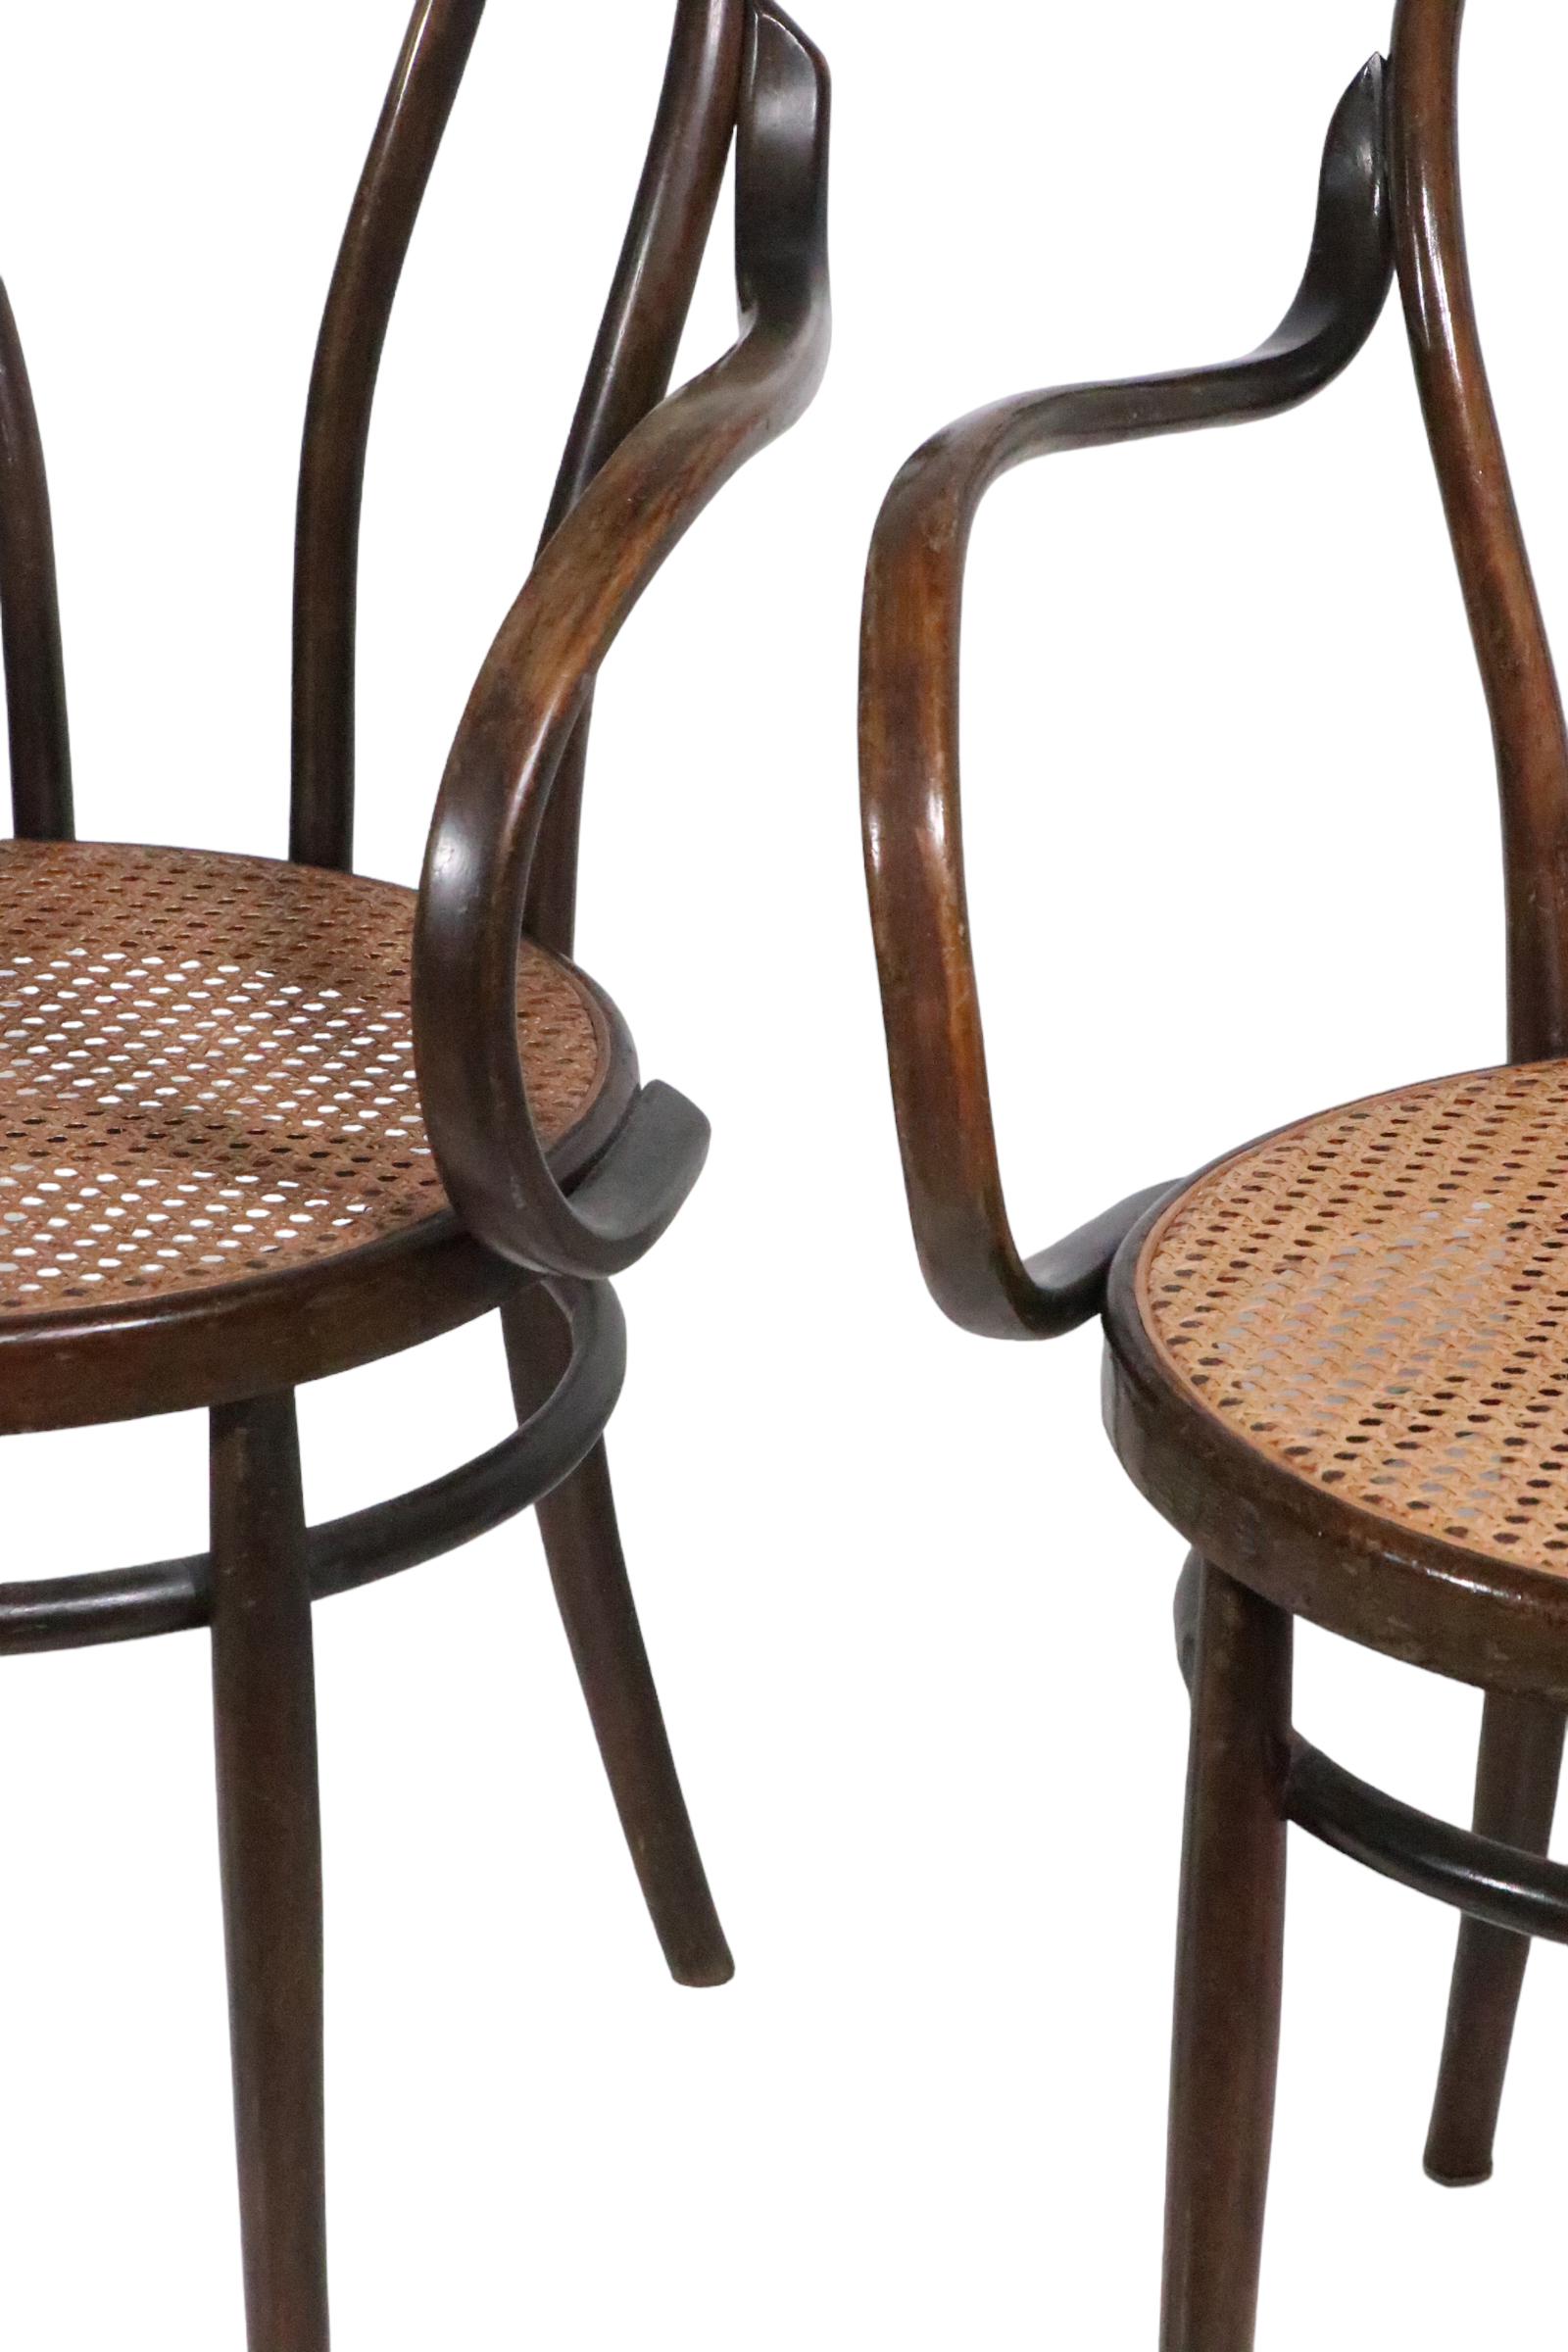 Chic pair of Vienesse Secessionist period bentwood arm chairs attributed to Thonet. The chairs are constructed of steam bent beech wood , and cane. These fine chairs are classic examples of the early roots of the modern design movement, circa 1880/